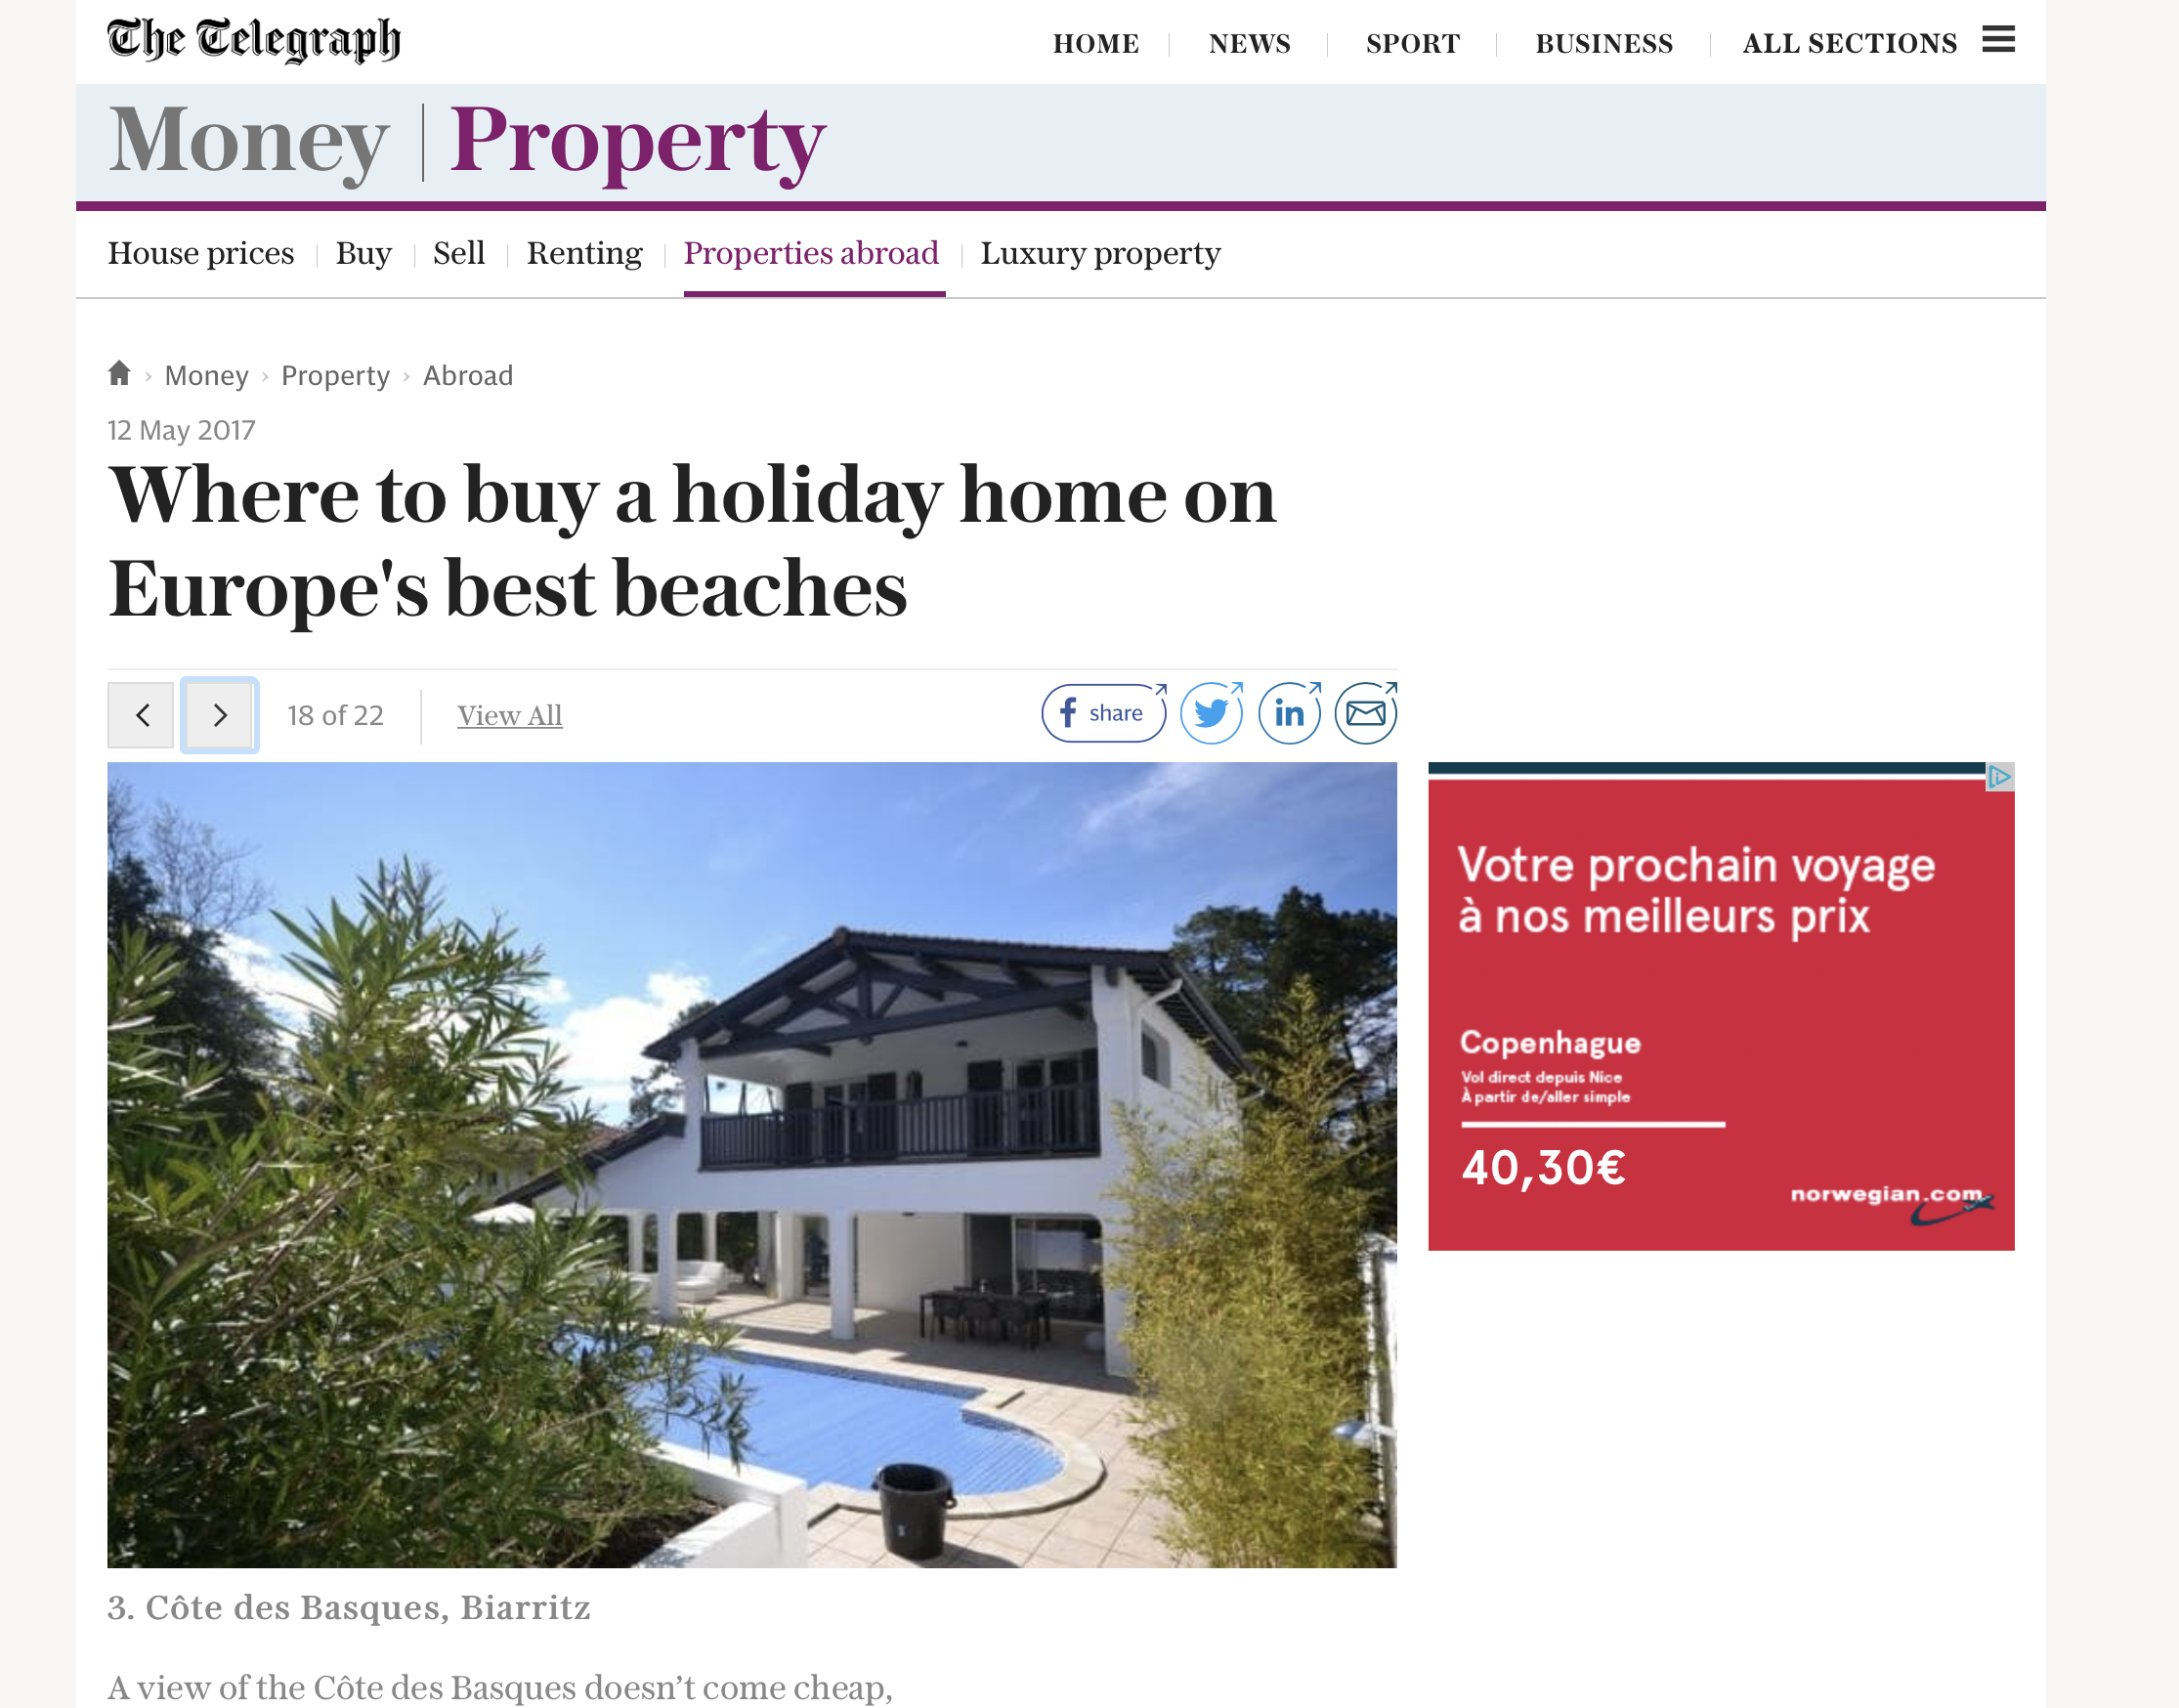 Daily Telegraph – Buying property by Europe’s best beaches